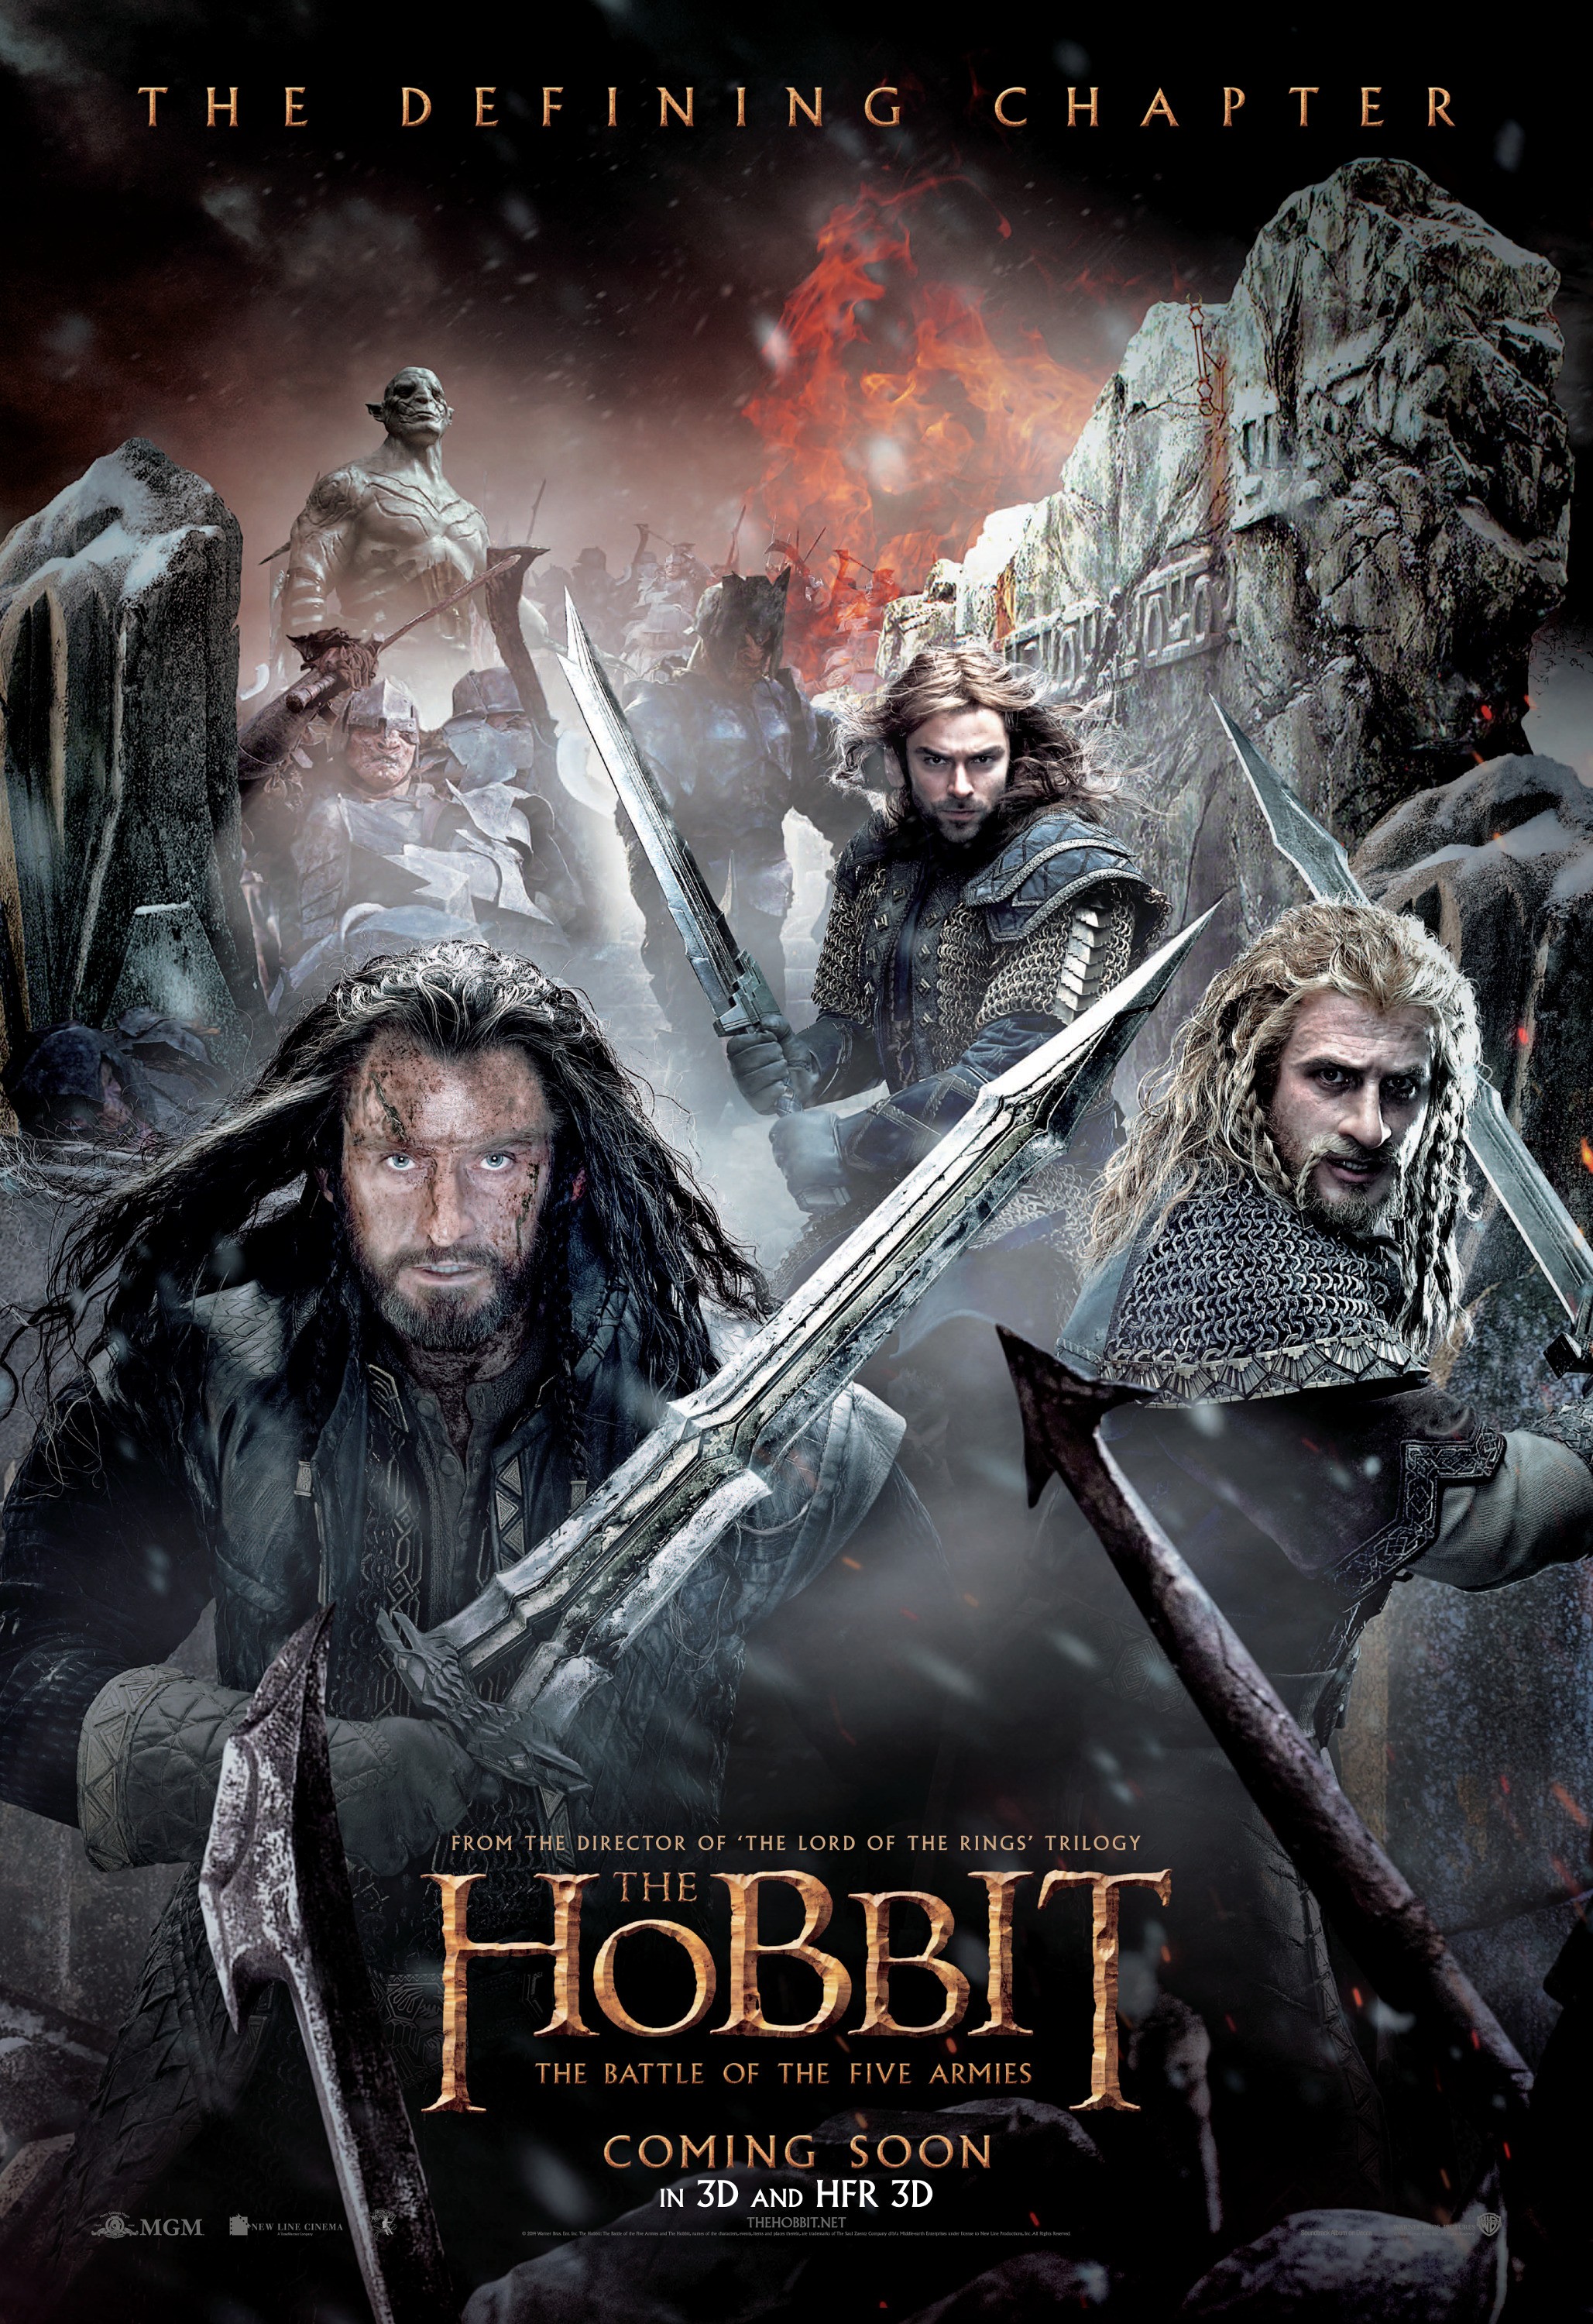 Mega Sized Movie Poster Image for The Hobbit: The Battle of the Five Armies (#27 of 28)